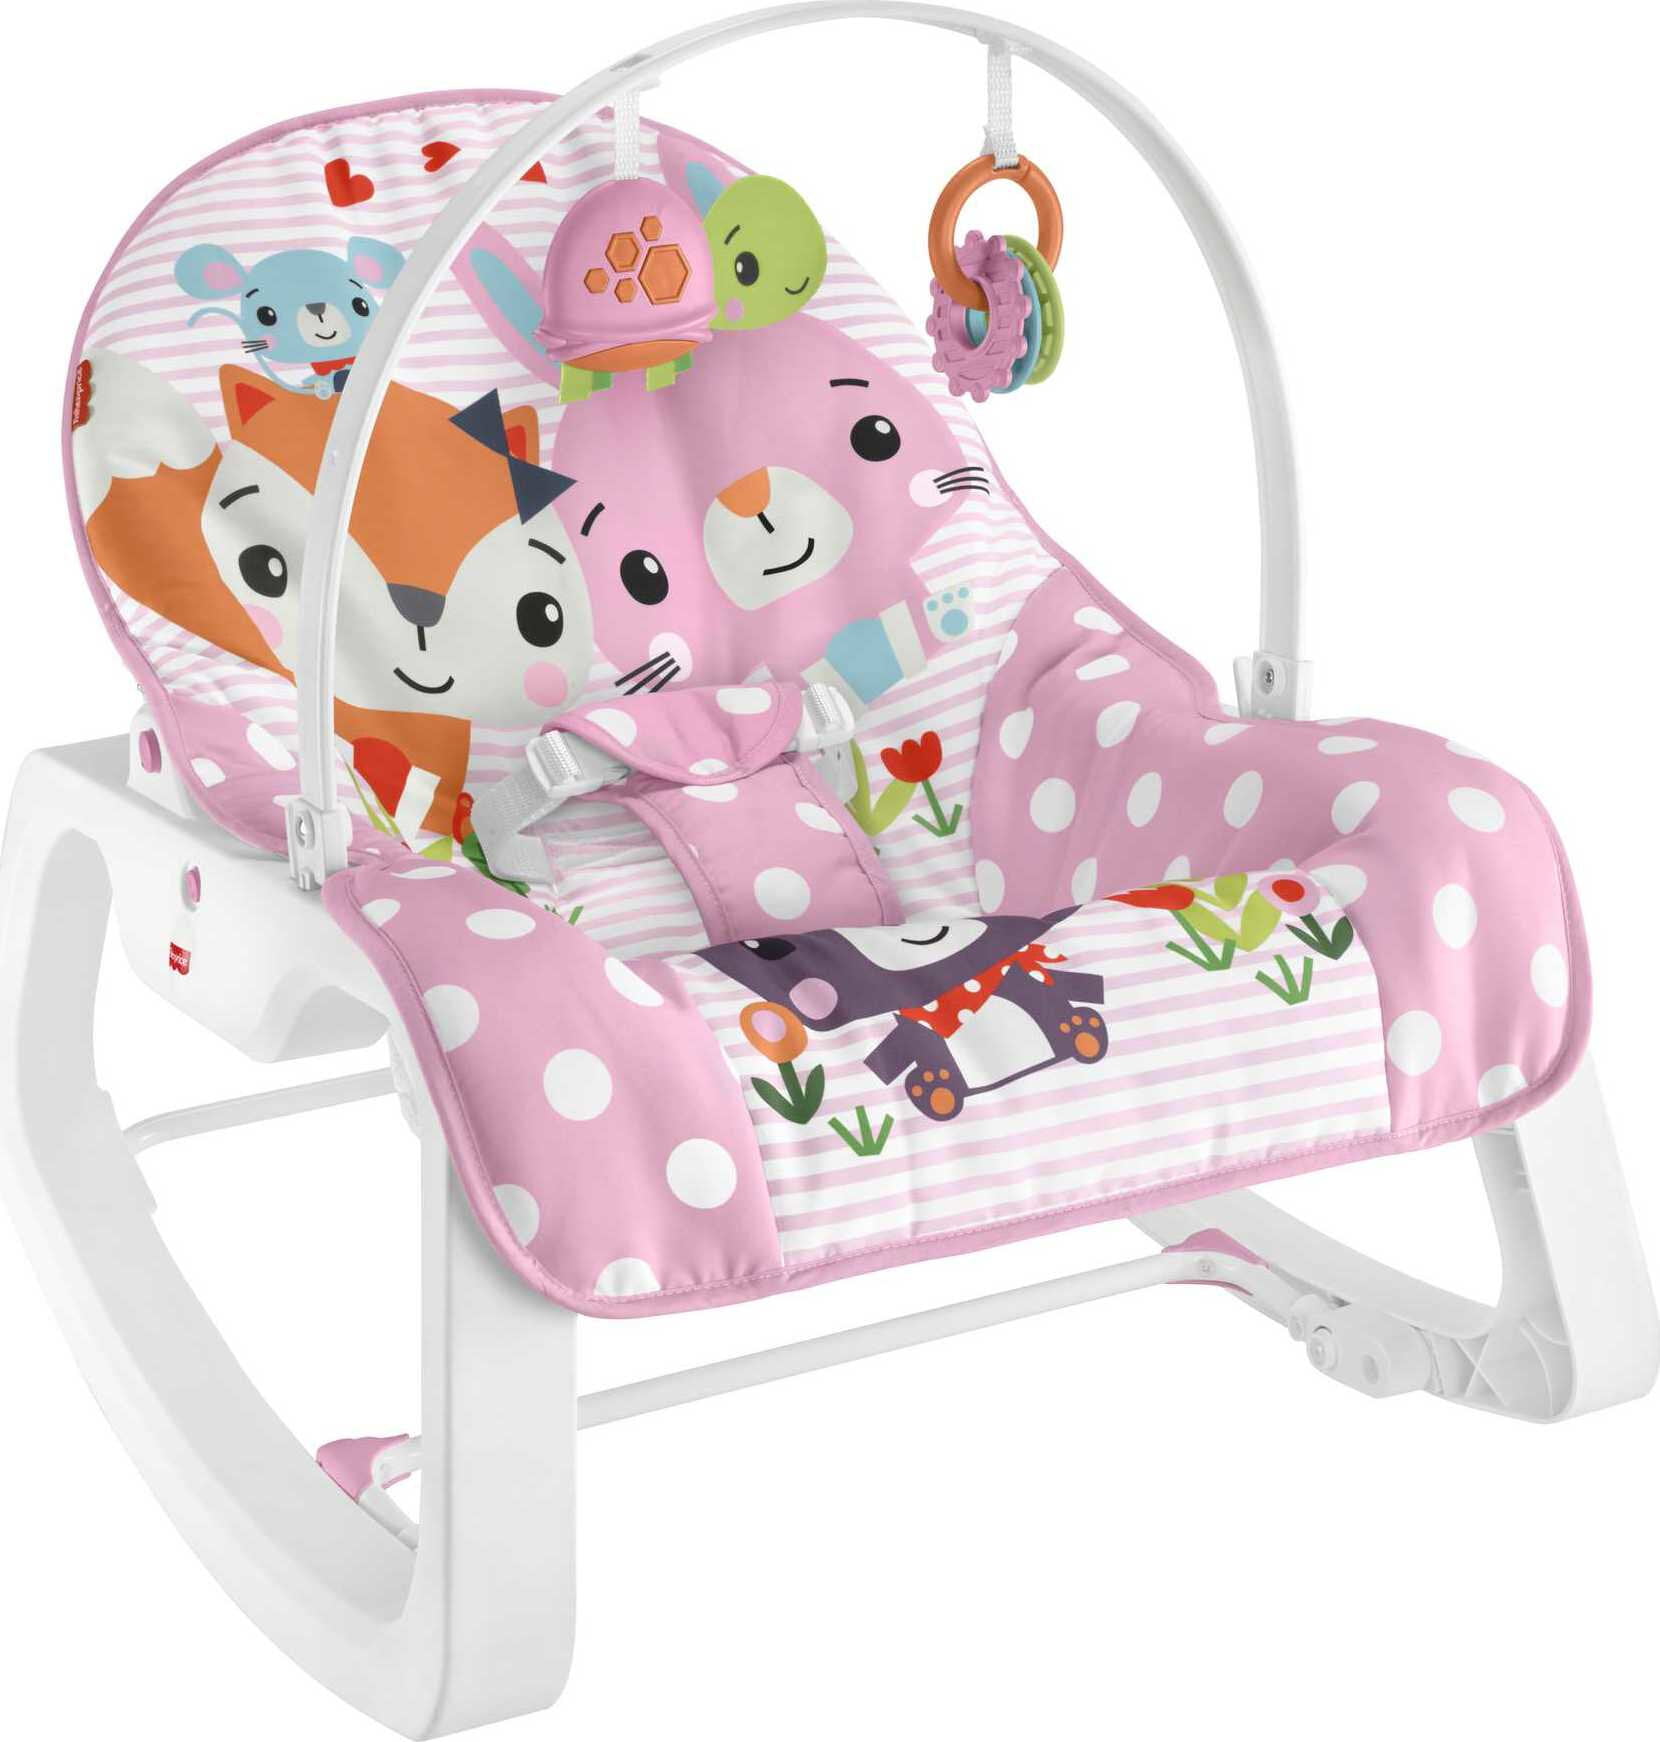 Automatic Bouncer Soothing Portable Swing Cradle with Music Girls Calming Vibration-Electric Baby Rocking Chair Seat for Boys Baby Swing Infant Toddler Rocker Shipping from USA, Multicolour 